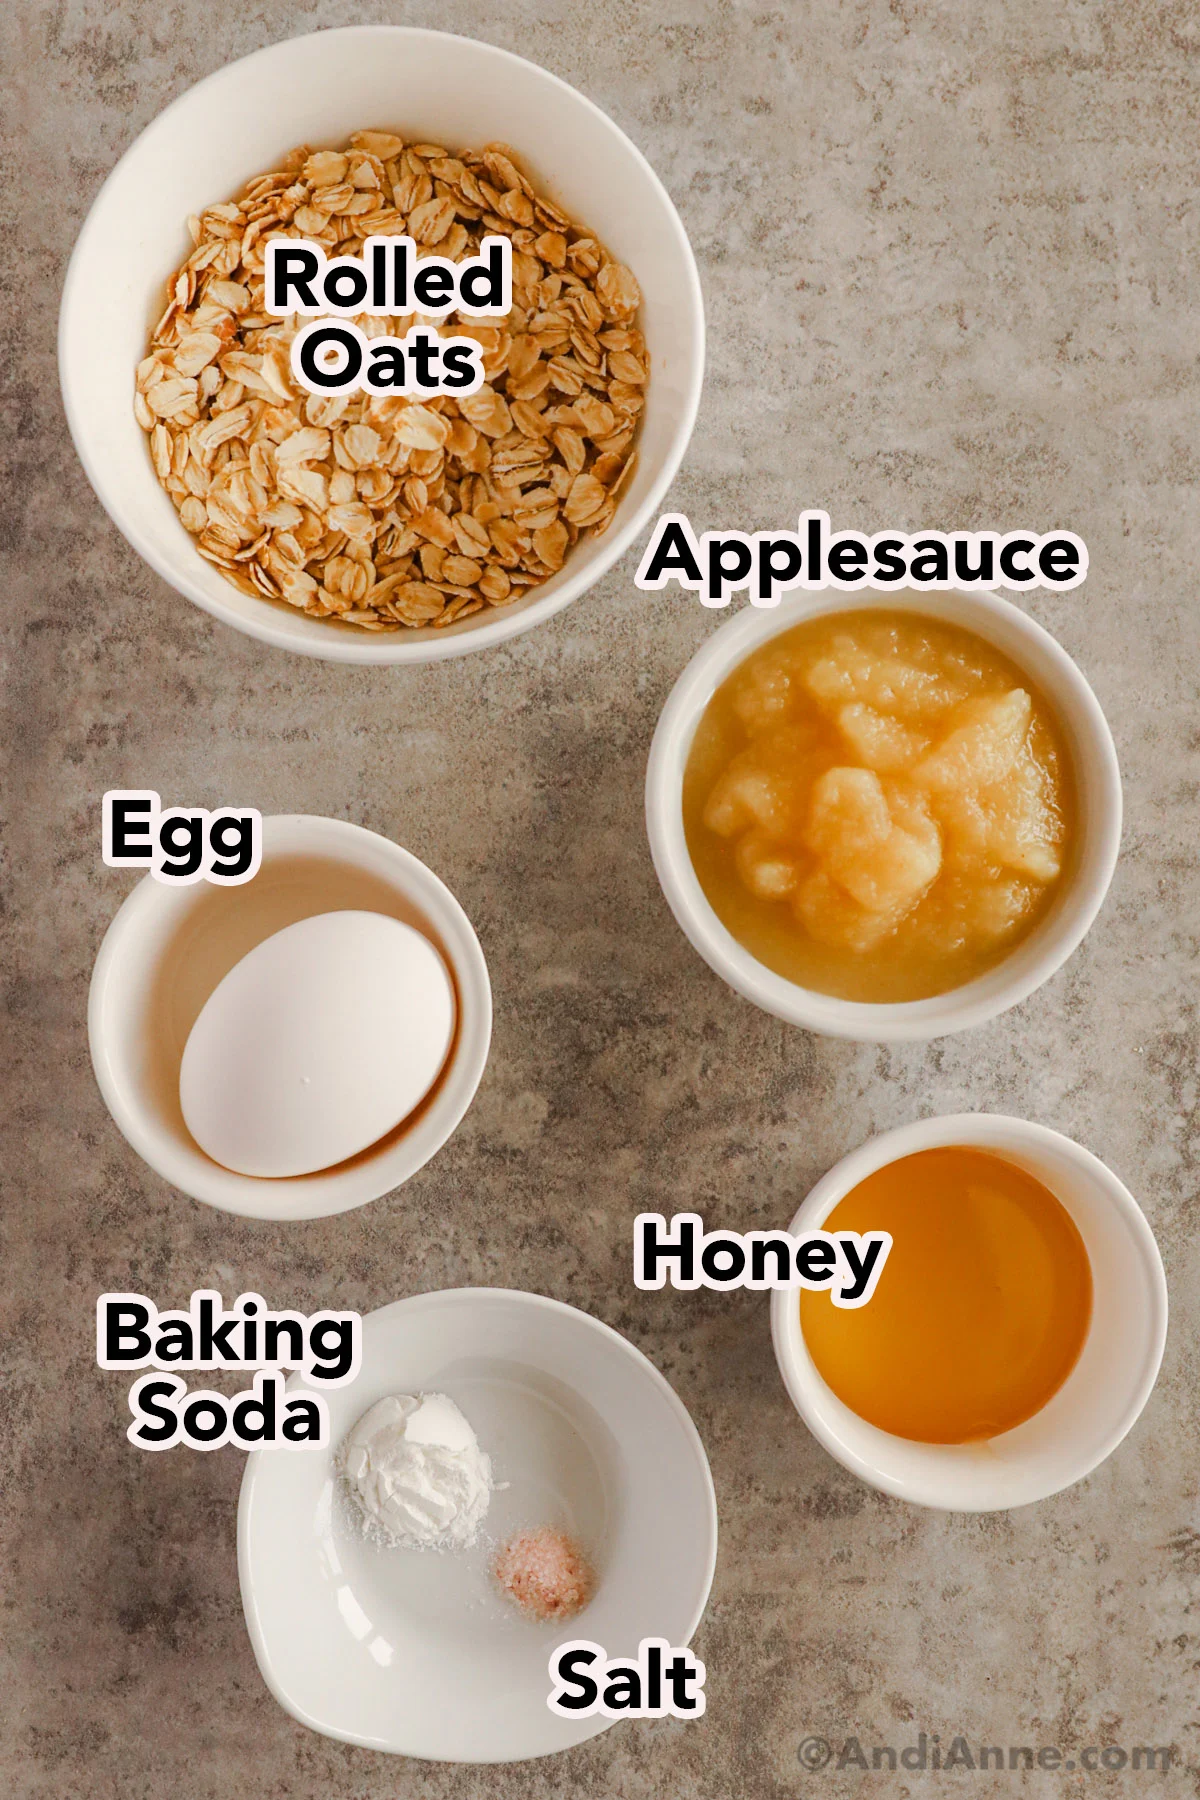 Recipe ingredients in bowls including rolled oats, applesauce, egg, baking soda and honey.